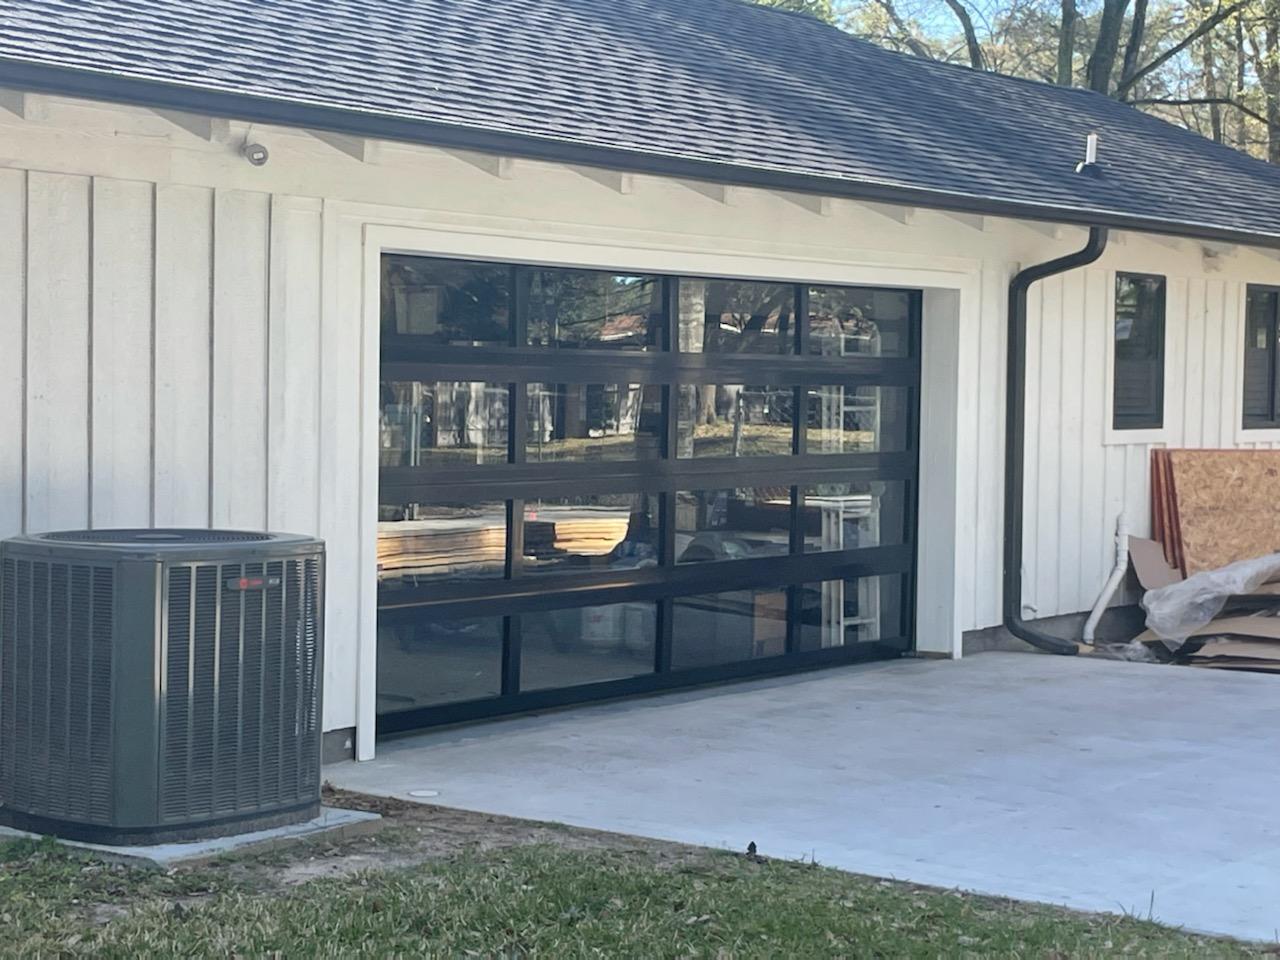 14 FT Wide By 8 FT Tall Full View Garage Door Matt Black Finish With Clear Glass